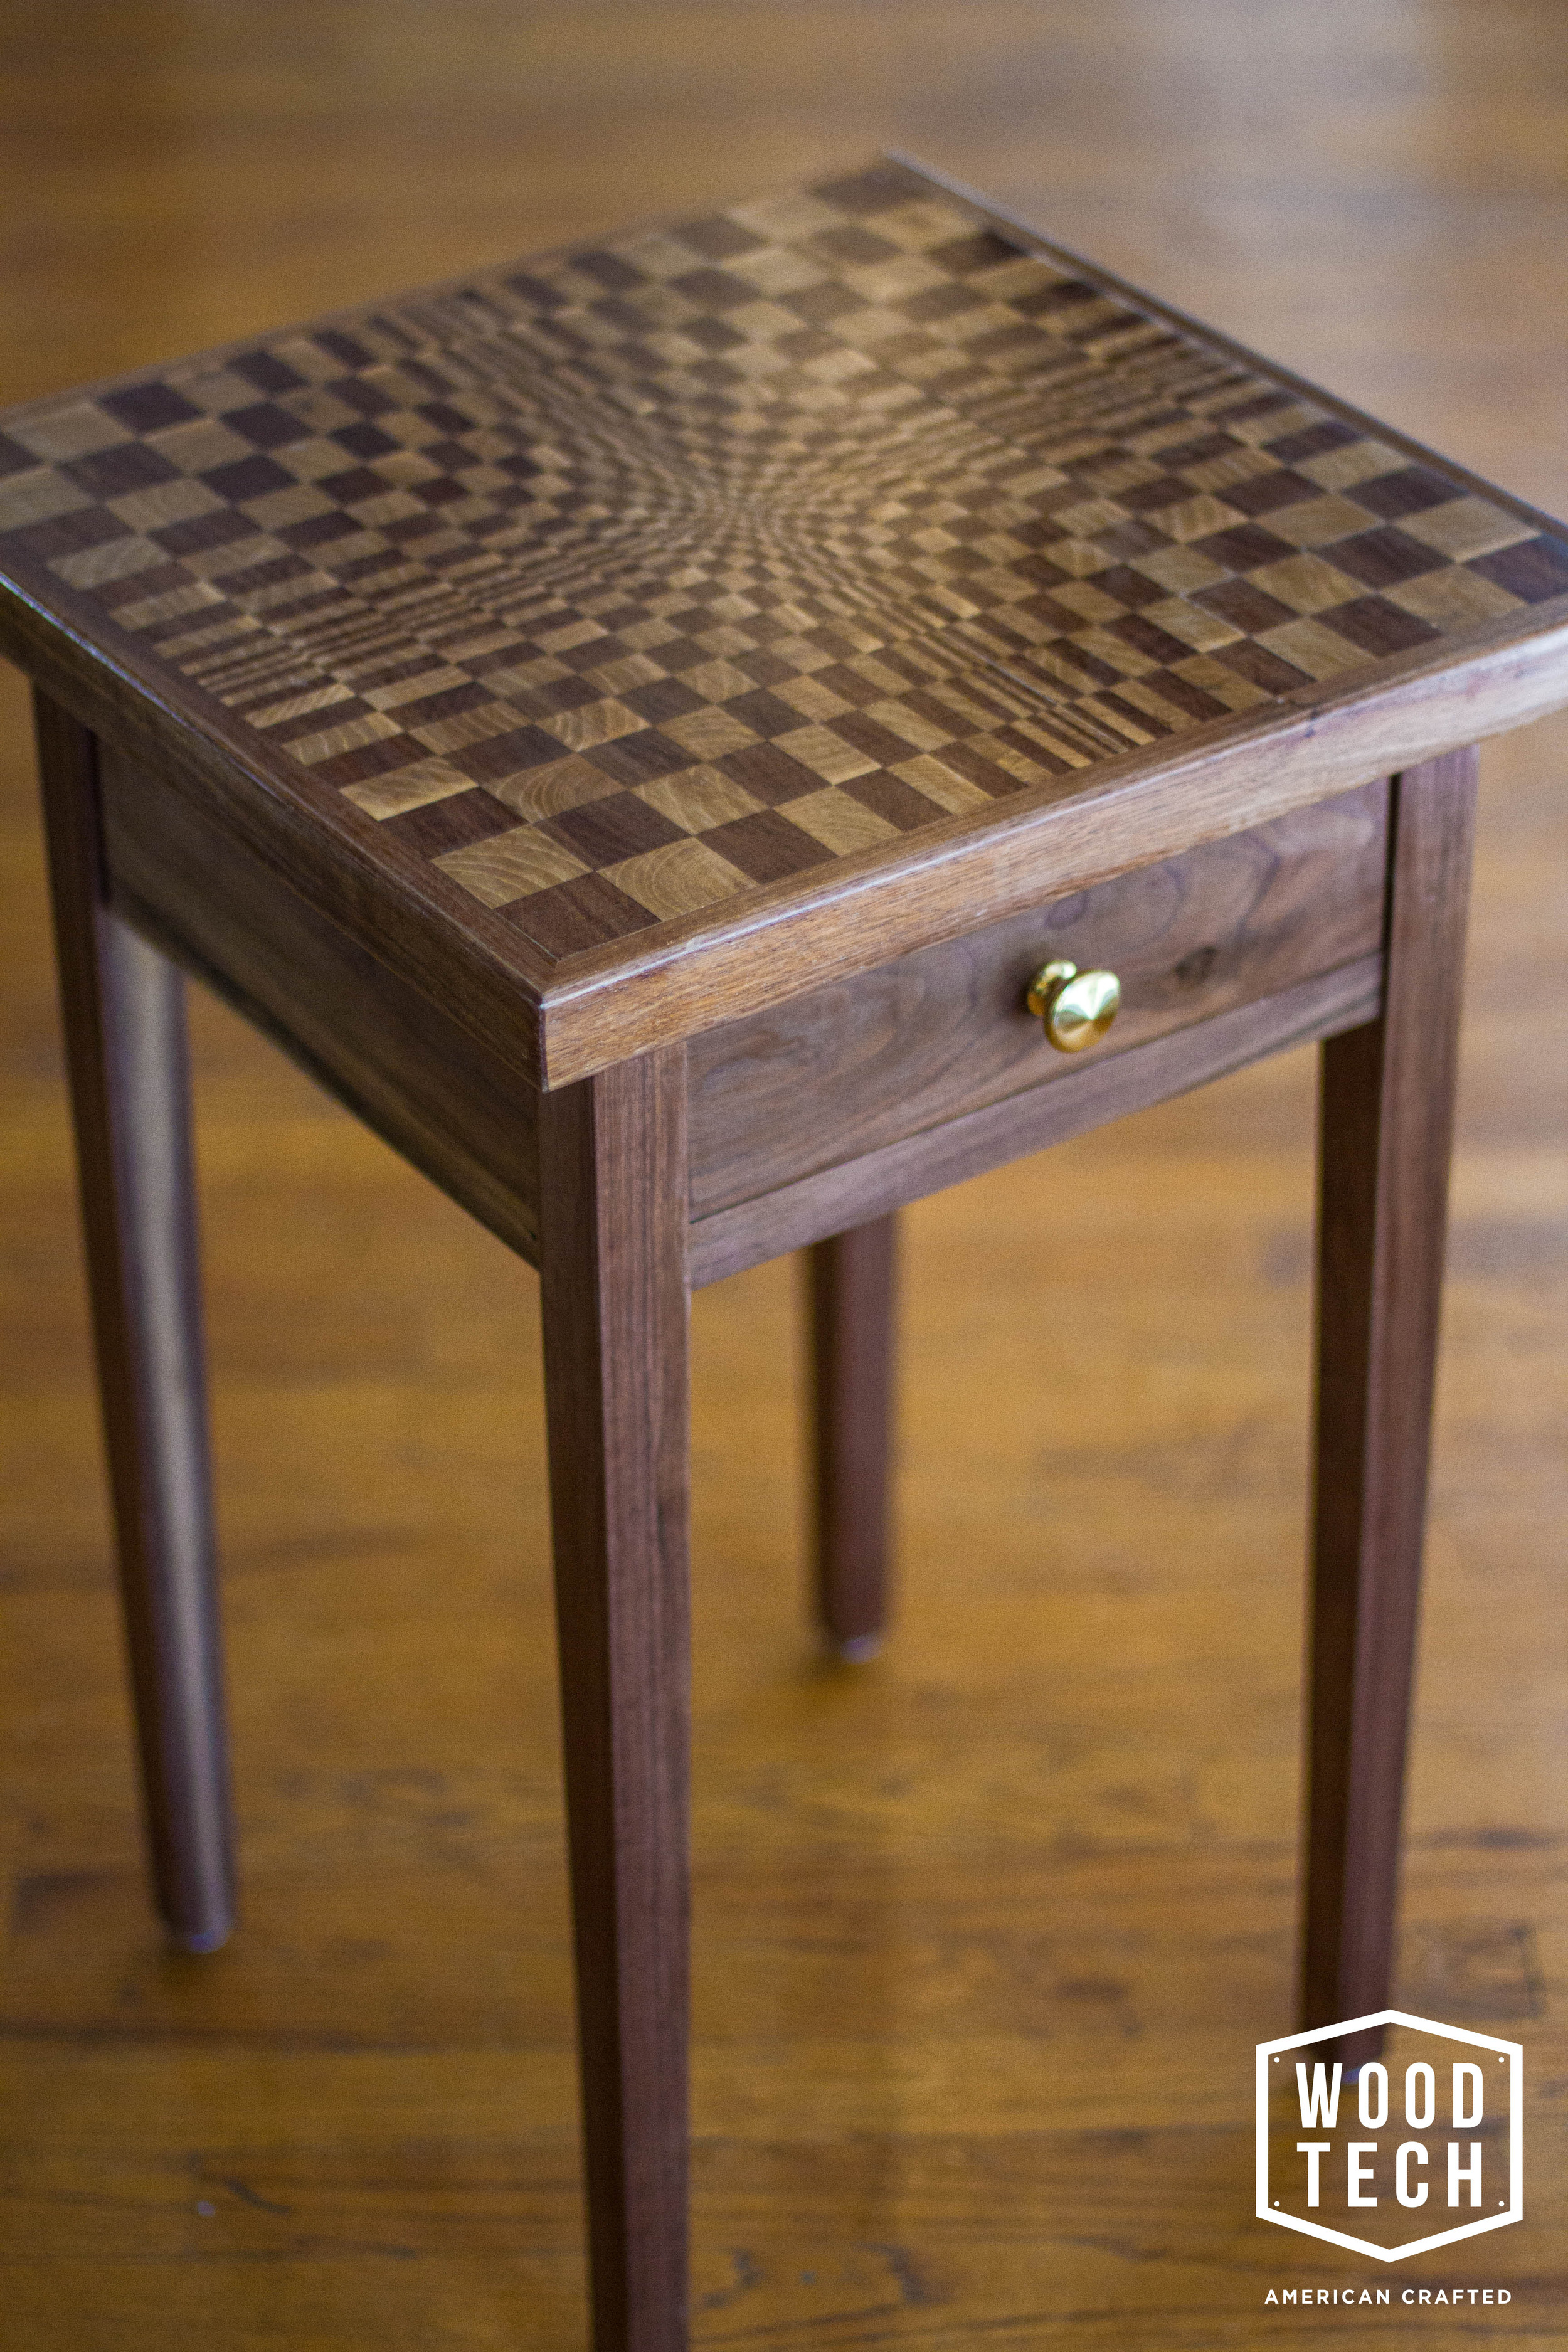 Custom Wood Table with Escher Inspired Design